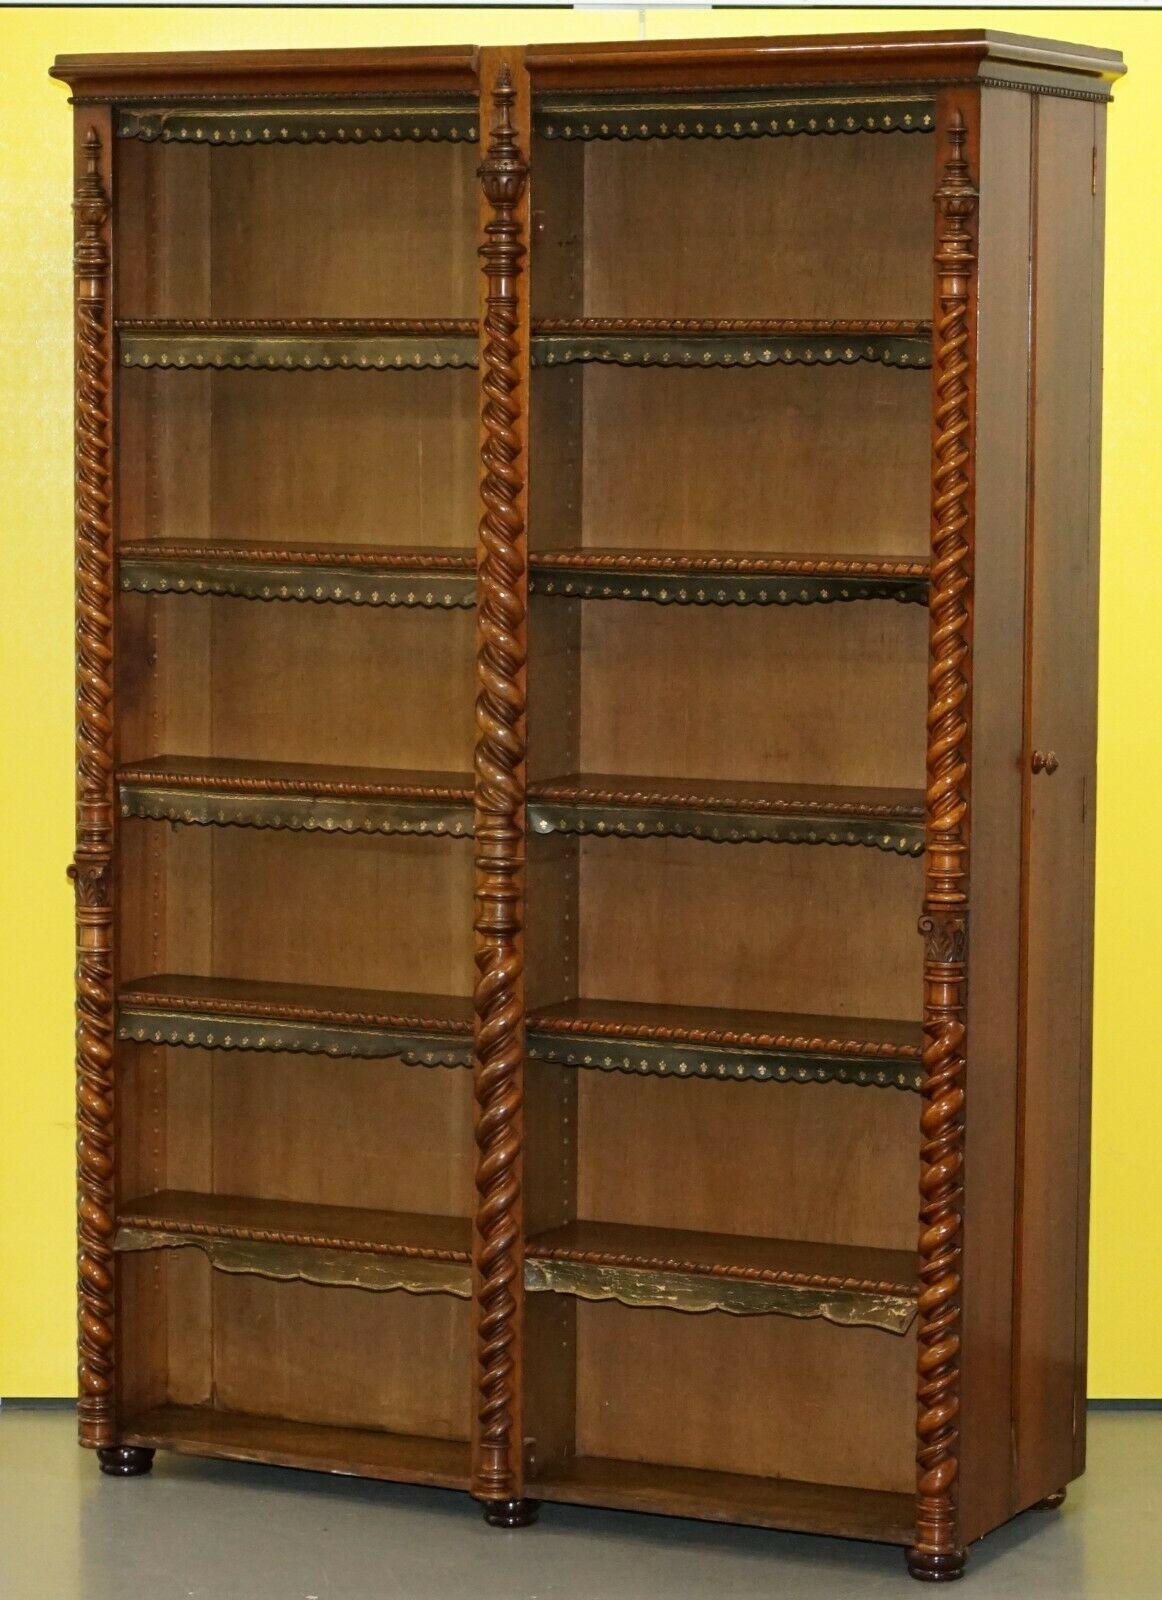 We are delighted to offer for sale this very rare original Regency period solid mahogany Library bookcase with built in twin back cupboards for hanging coats.

 I have honestly never seen another bookcase like this, it is exceptionally rare, the